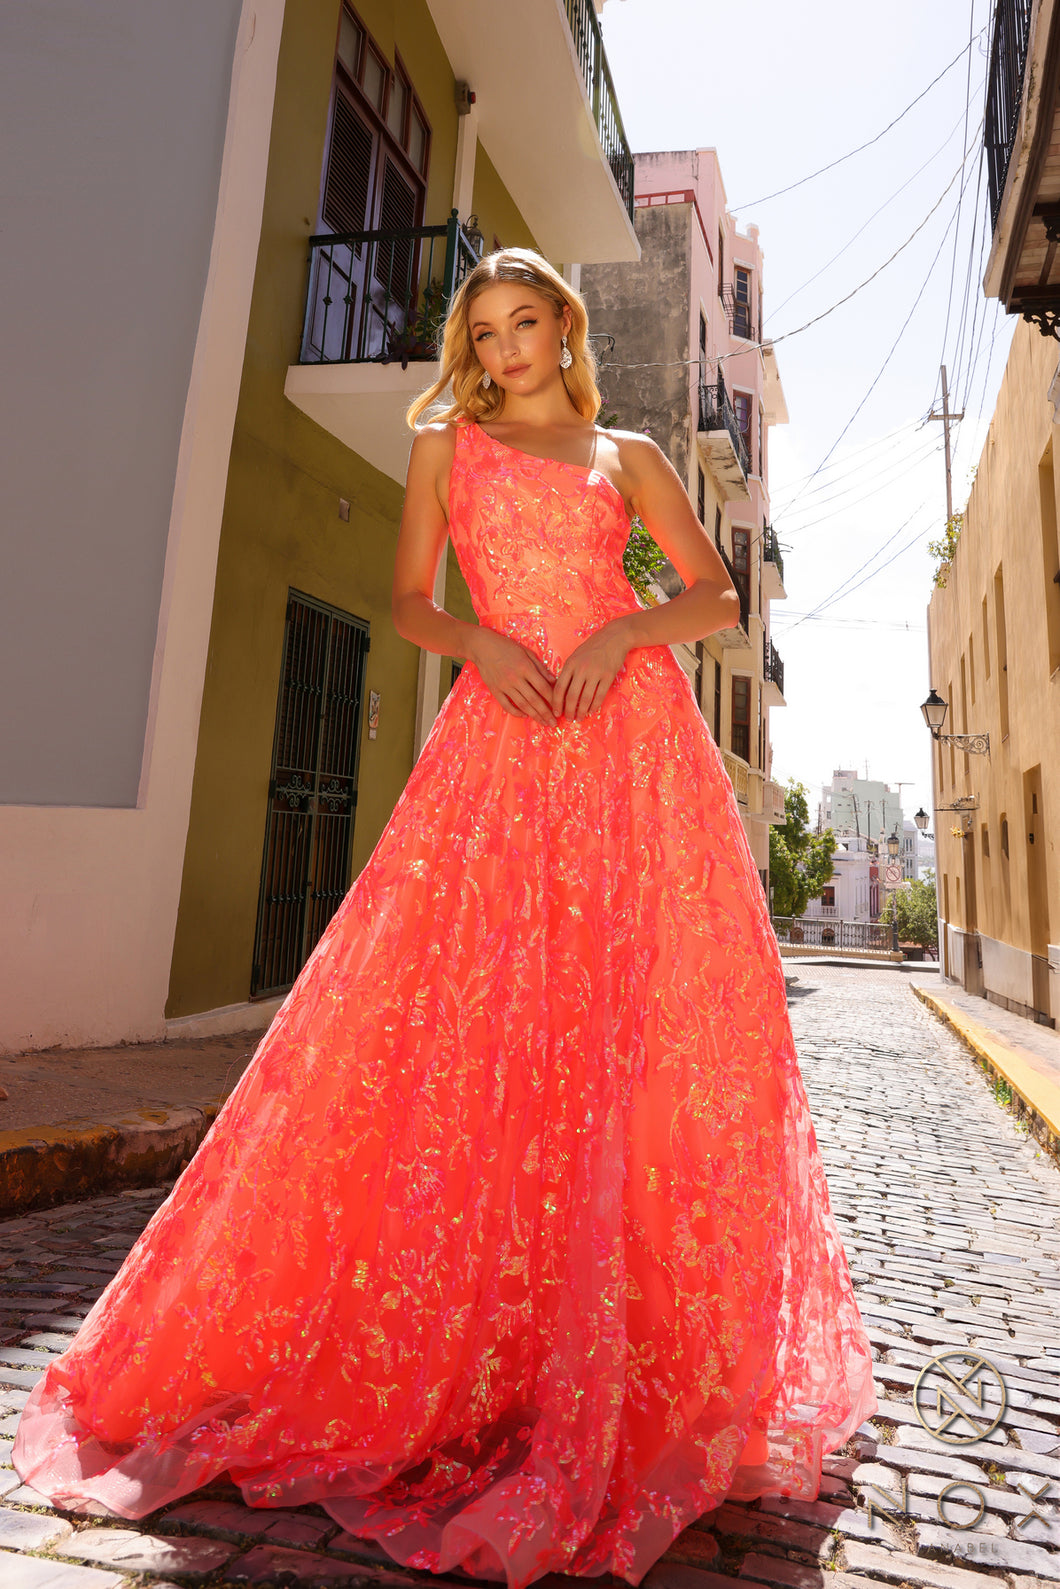 N R1305 - Neon Peach Iridescent Sequin Patterned One Shoulder A-Line Prom Gown PROM GOWN Nox 0 NEON PEACH 